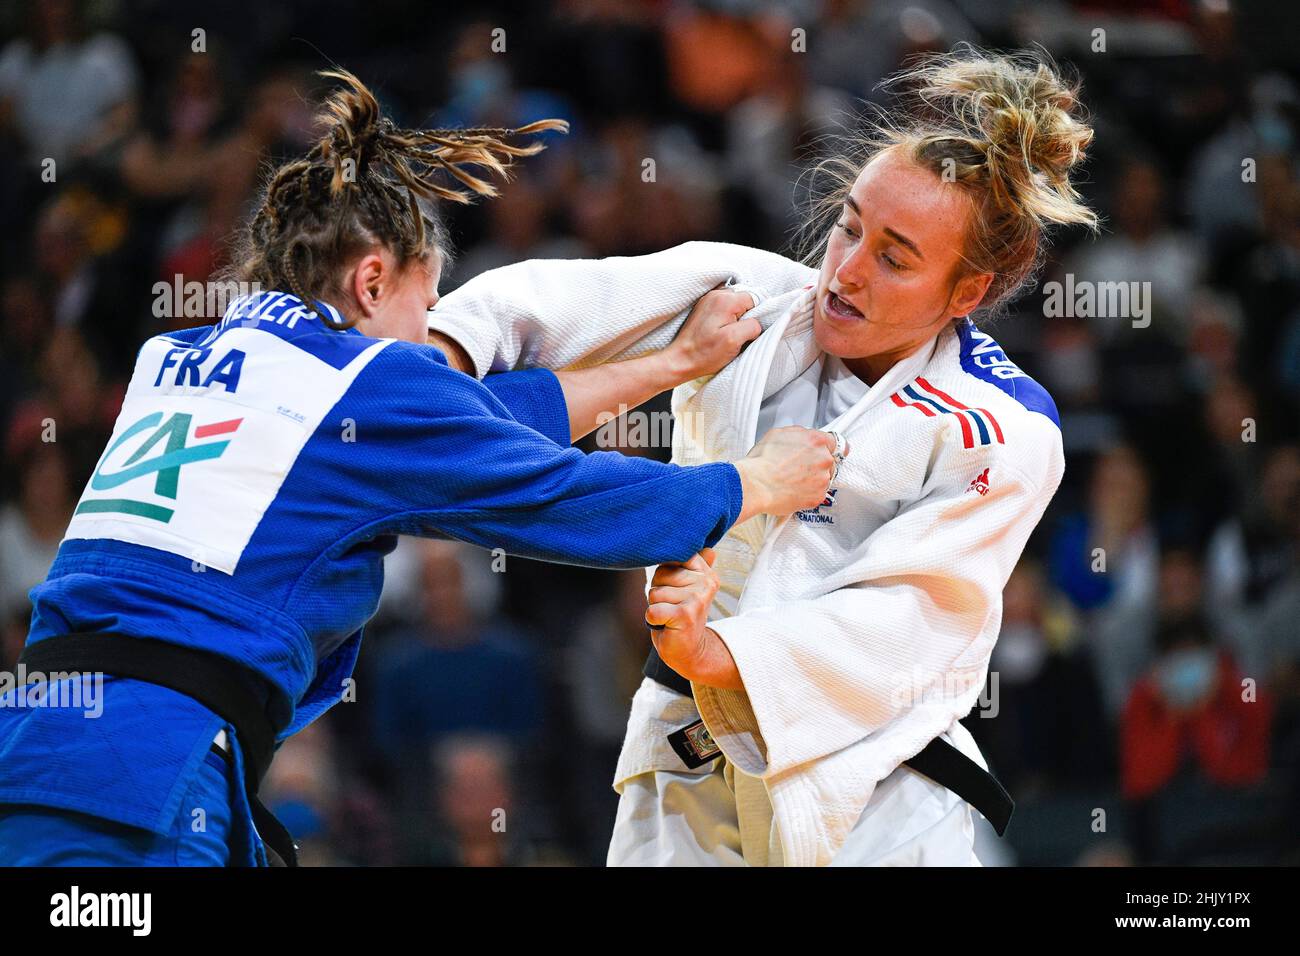 Women -63 kg, Lucy Renshall (white) of Great Britain Silver medal competes during the Paris Grand Slam 2021, Judo event on October 16, 2021 at AccorHo Stock Photo